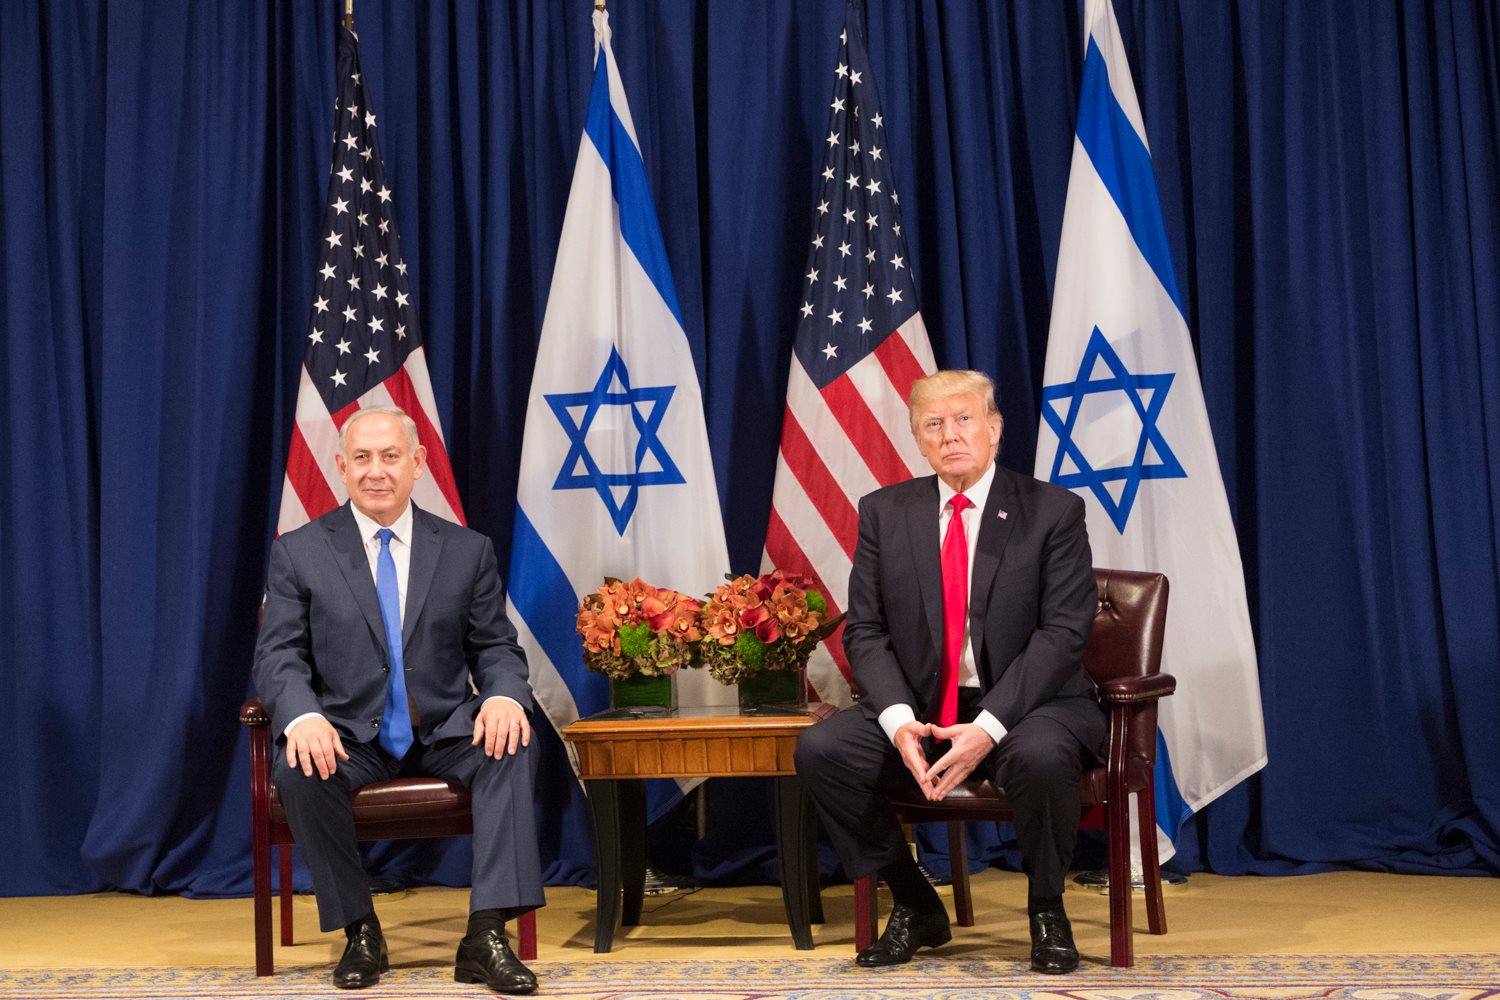 Donald Trump congratulates Netanyahu on being re elected as Israel PM